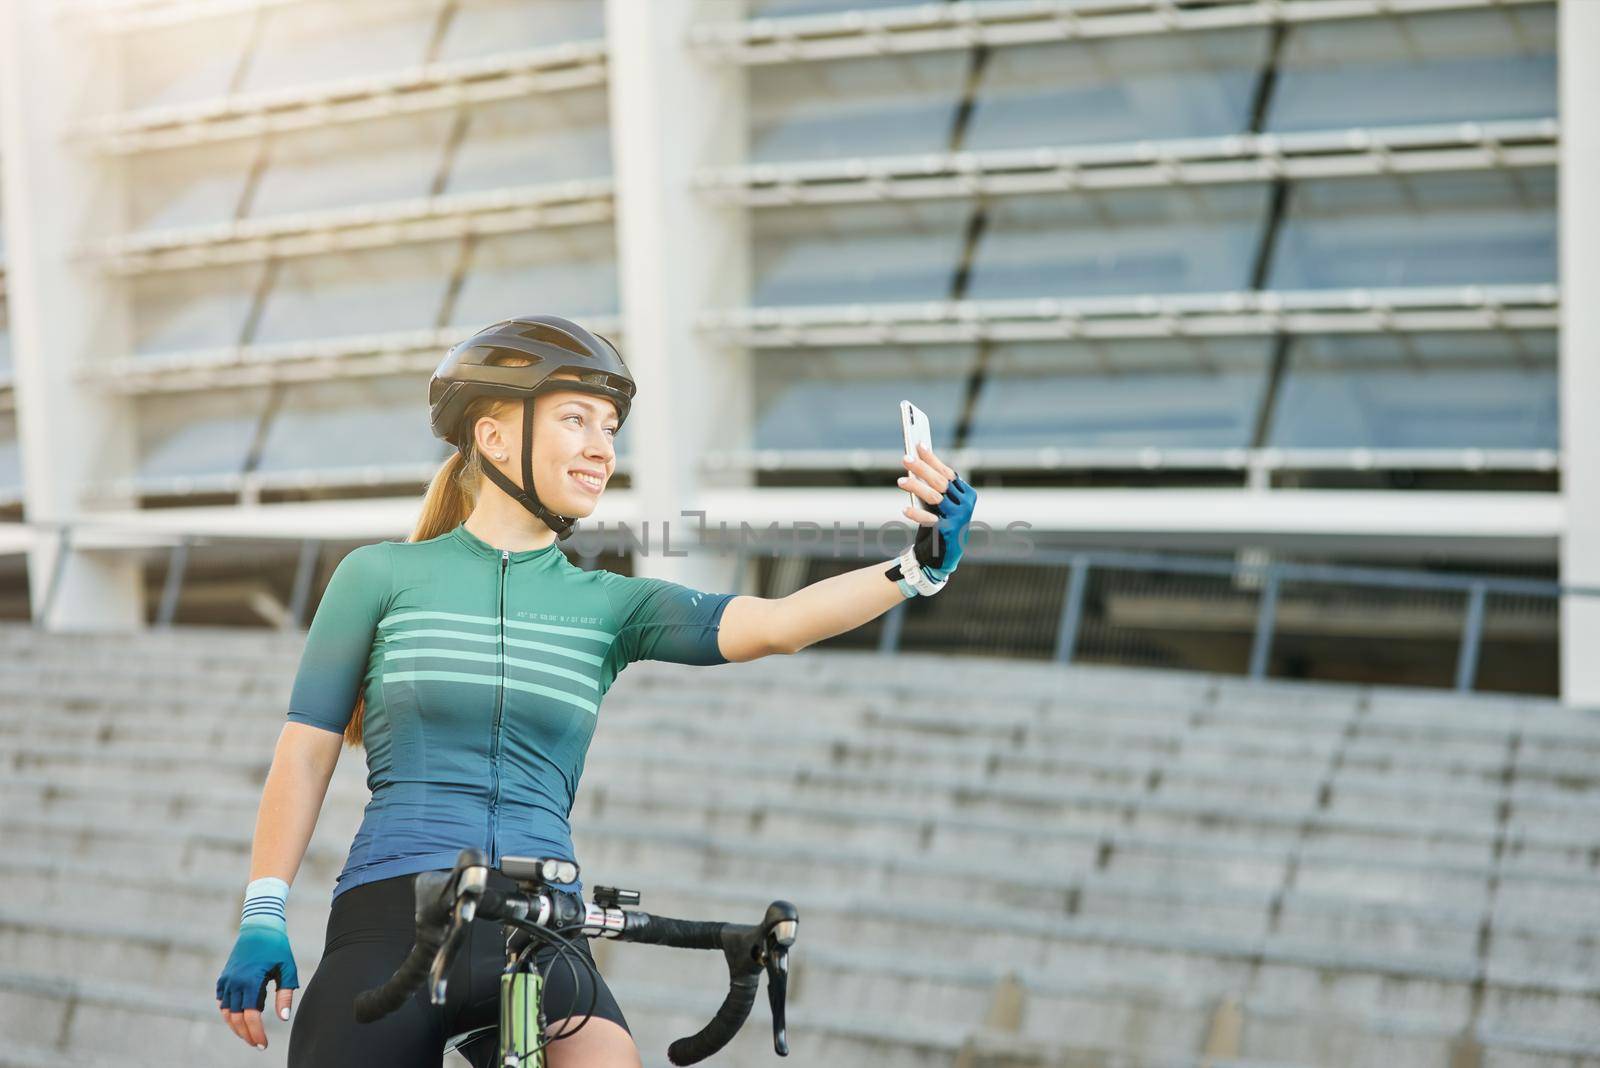 Adorable young woman, professional female cyclist smiling while holding smartphone and taking selfie, standing with her bike outdoors on a daytime by friendsstock